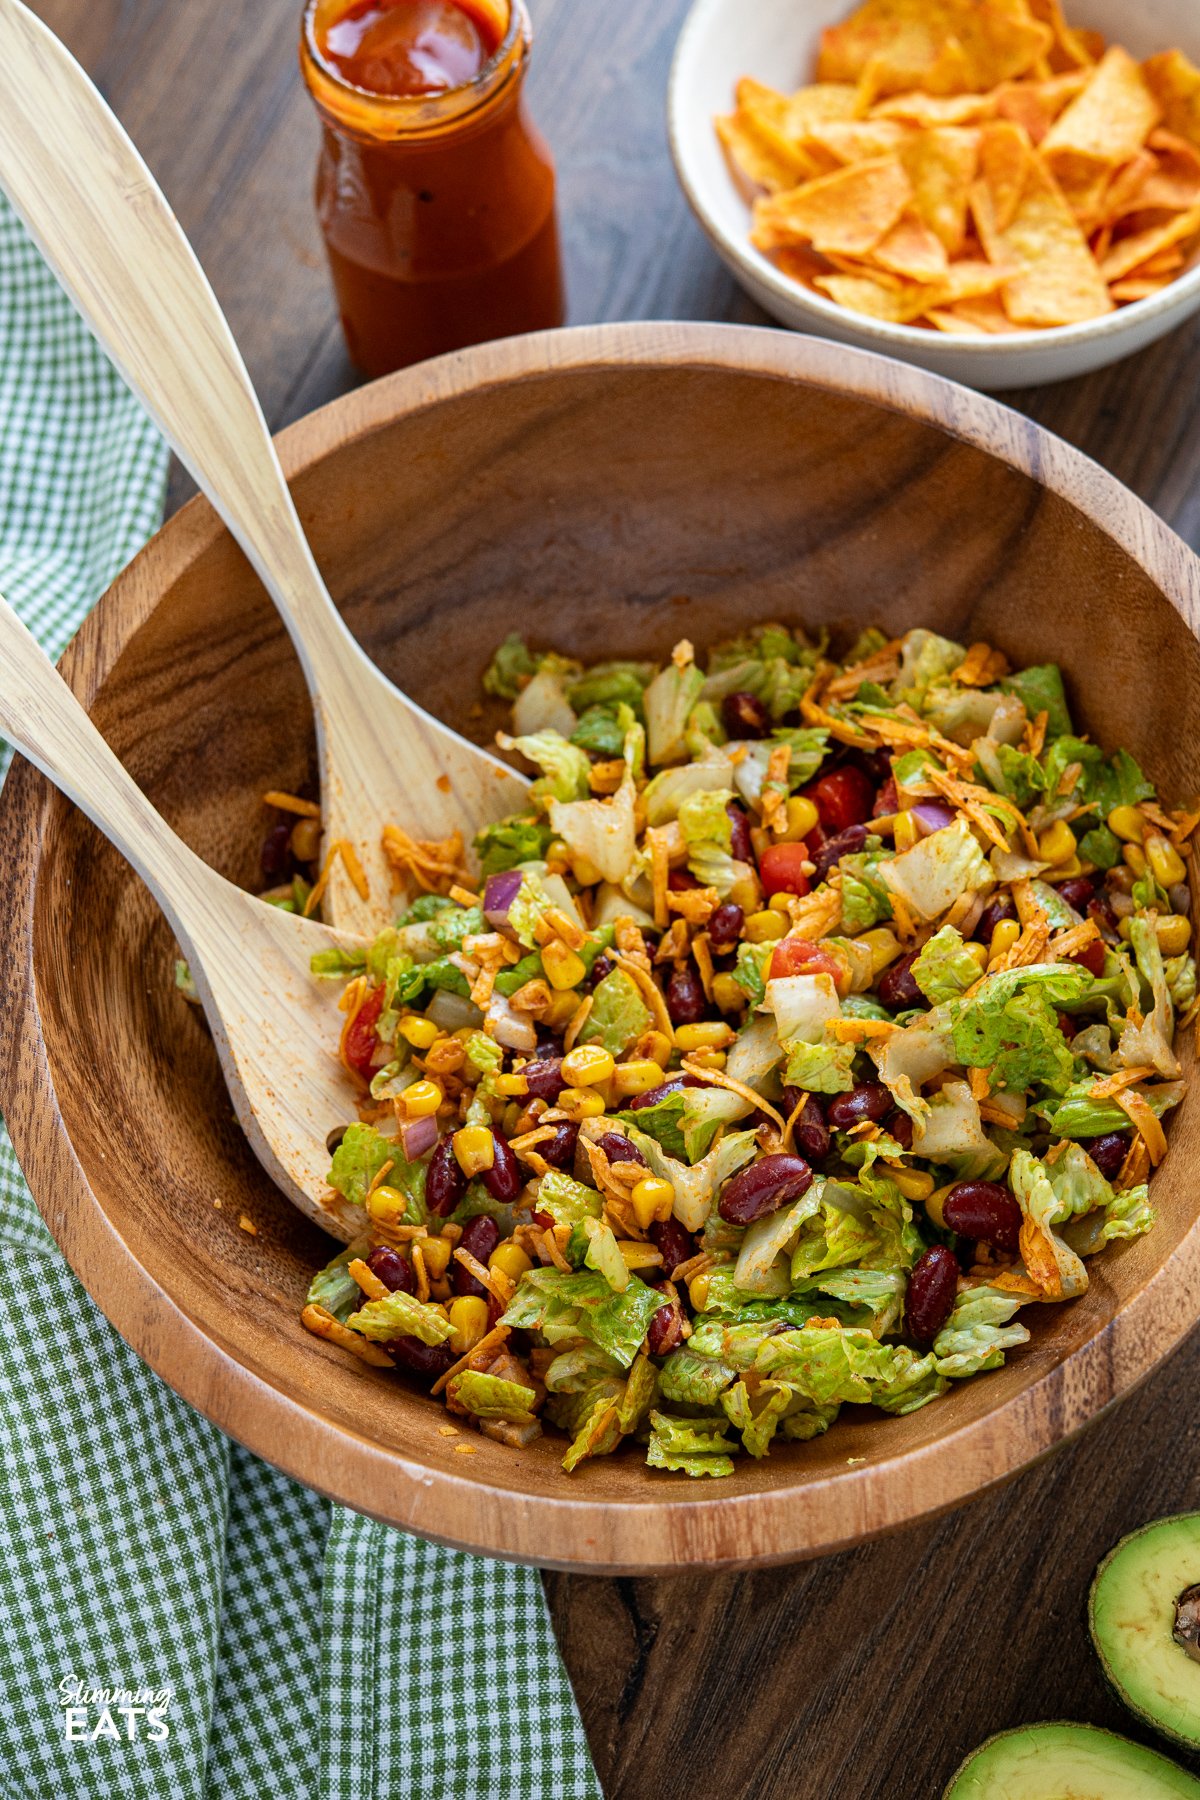 A wooden bowl holds a colourful medley of ingredients for Dorito Taco Salad, including lettuce, tomatoes, onions, and cheese, ready to be tossed together with salad spoons for a satisfying meal.